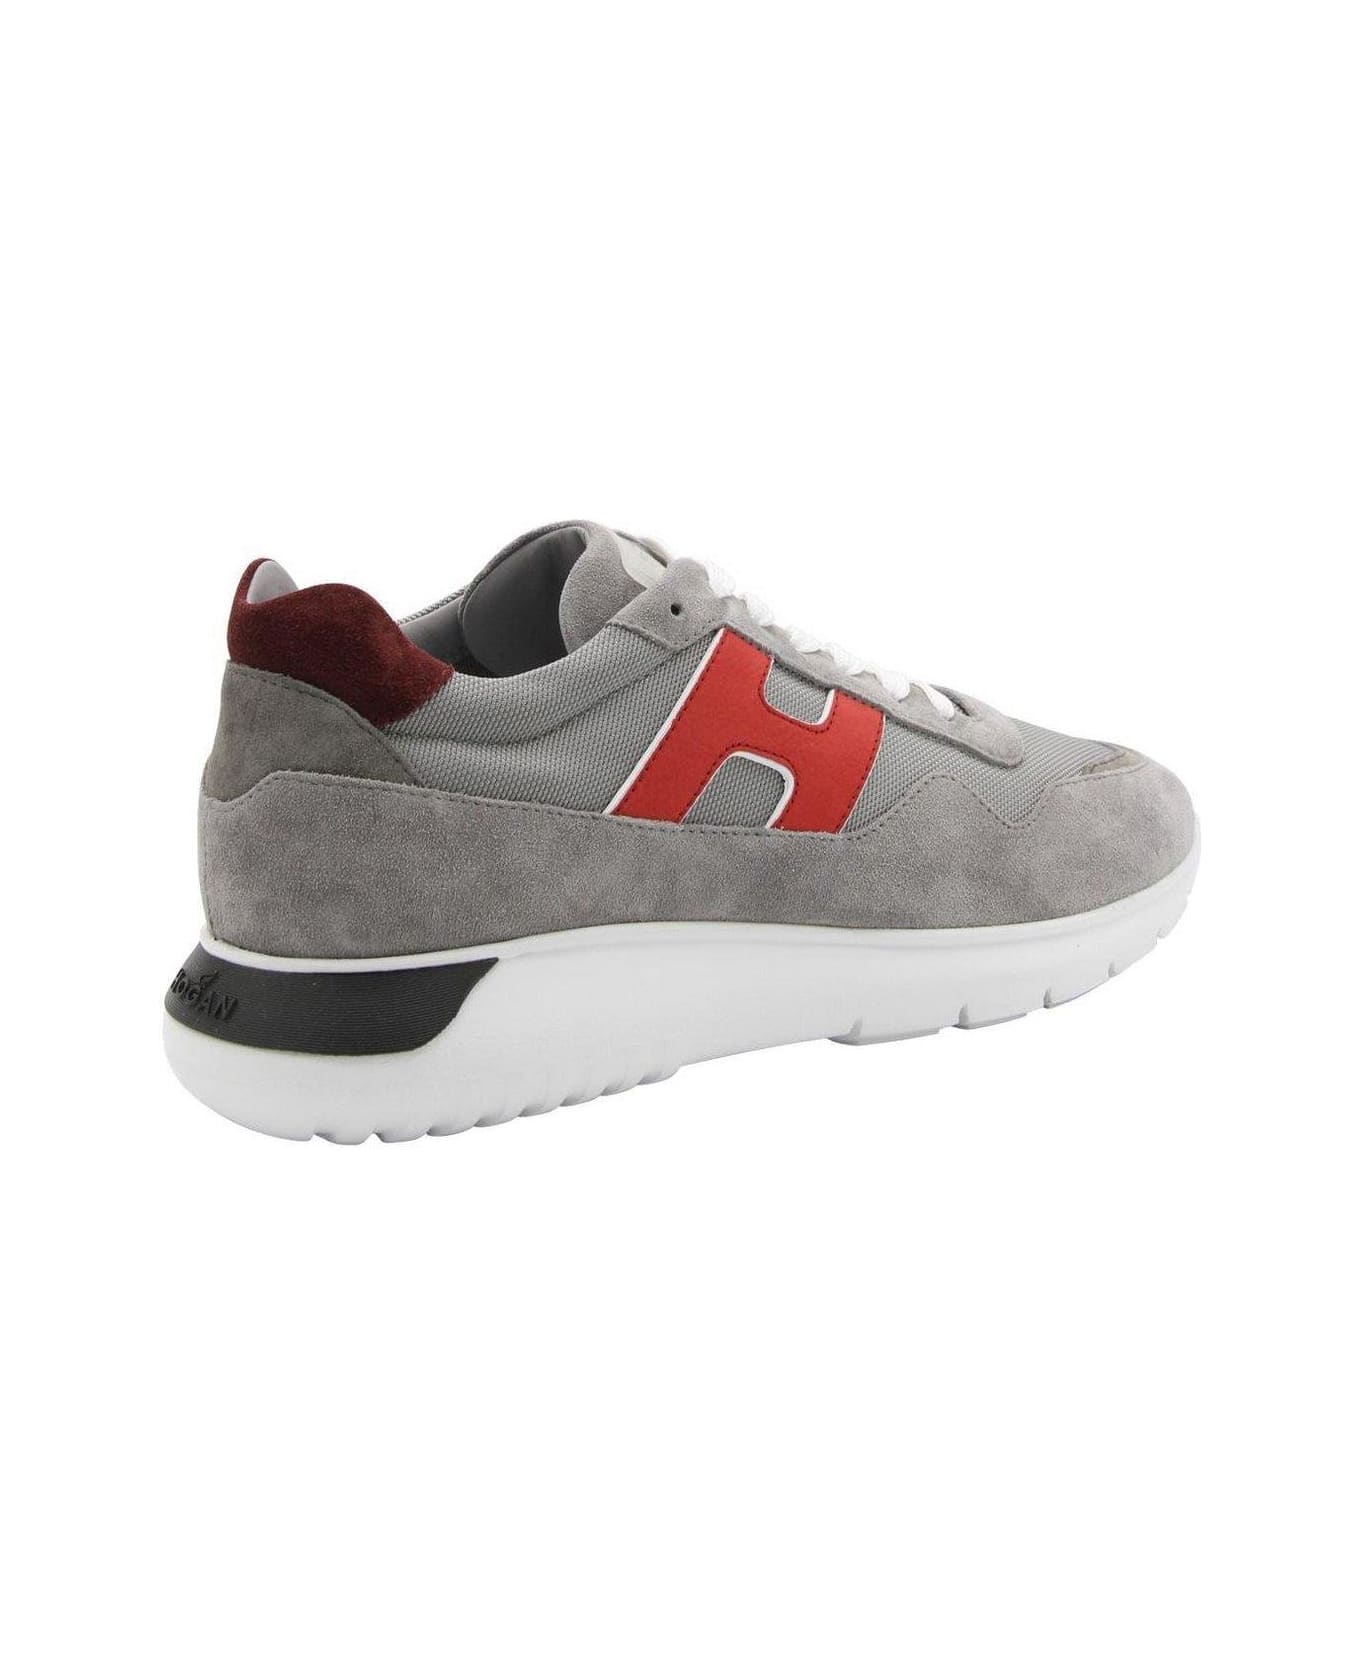 Hogan Interactive 3 Side H Patch Sneakers - GREY